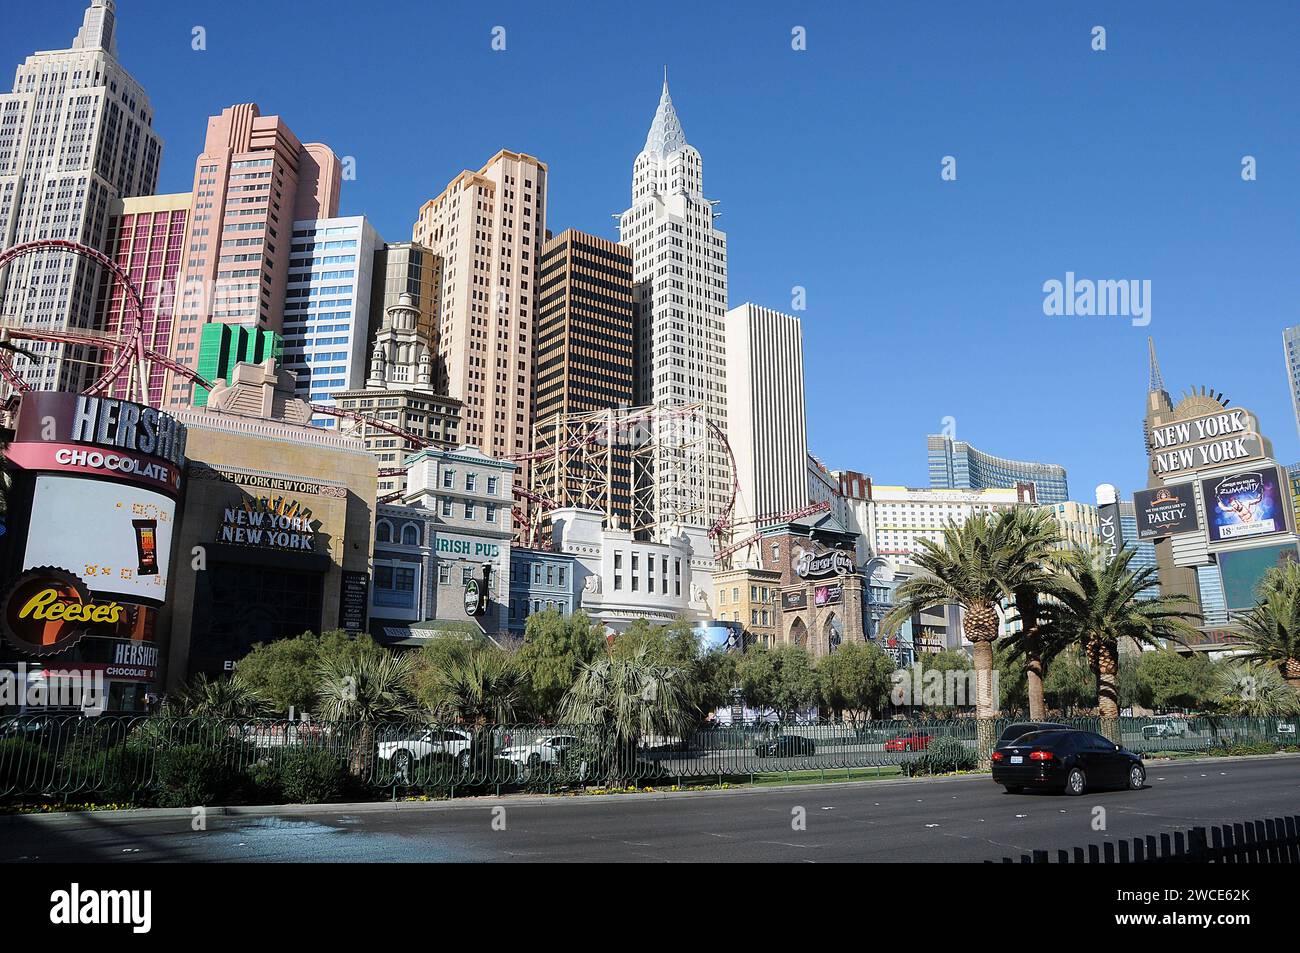 LAS VEGAS / NEVADA/USA 15 December 2017. New york casino and statue of liberty infront casino in Las Vegas ,Nevada. Photo.Francis Dean/Dean Pictures Stock Photo